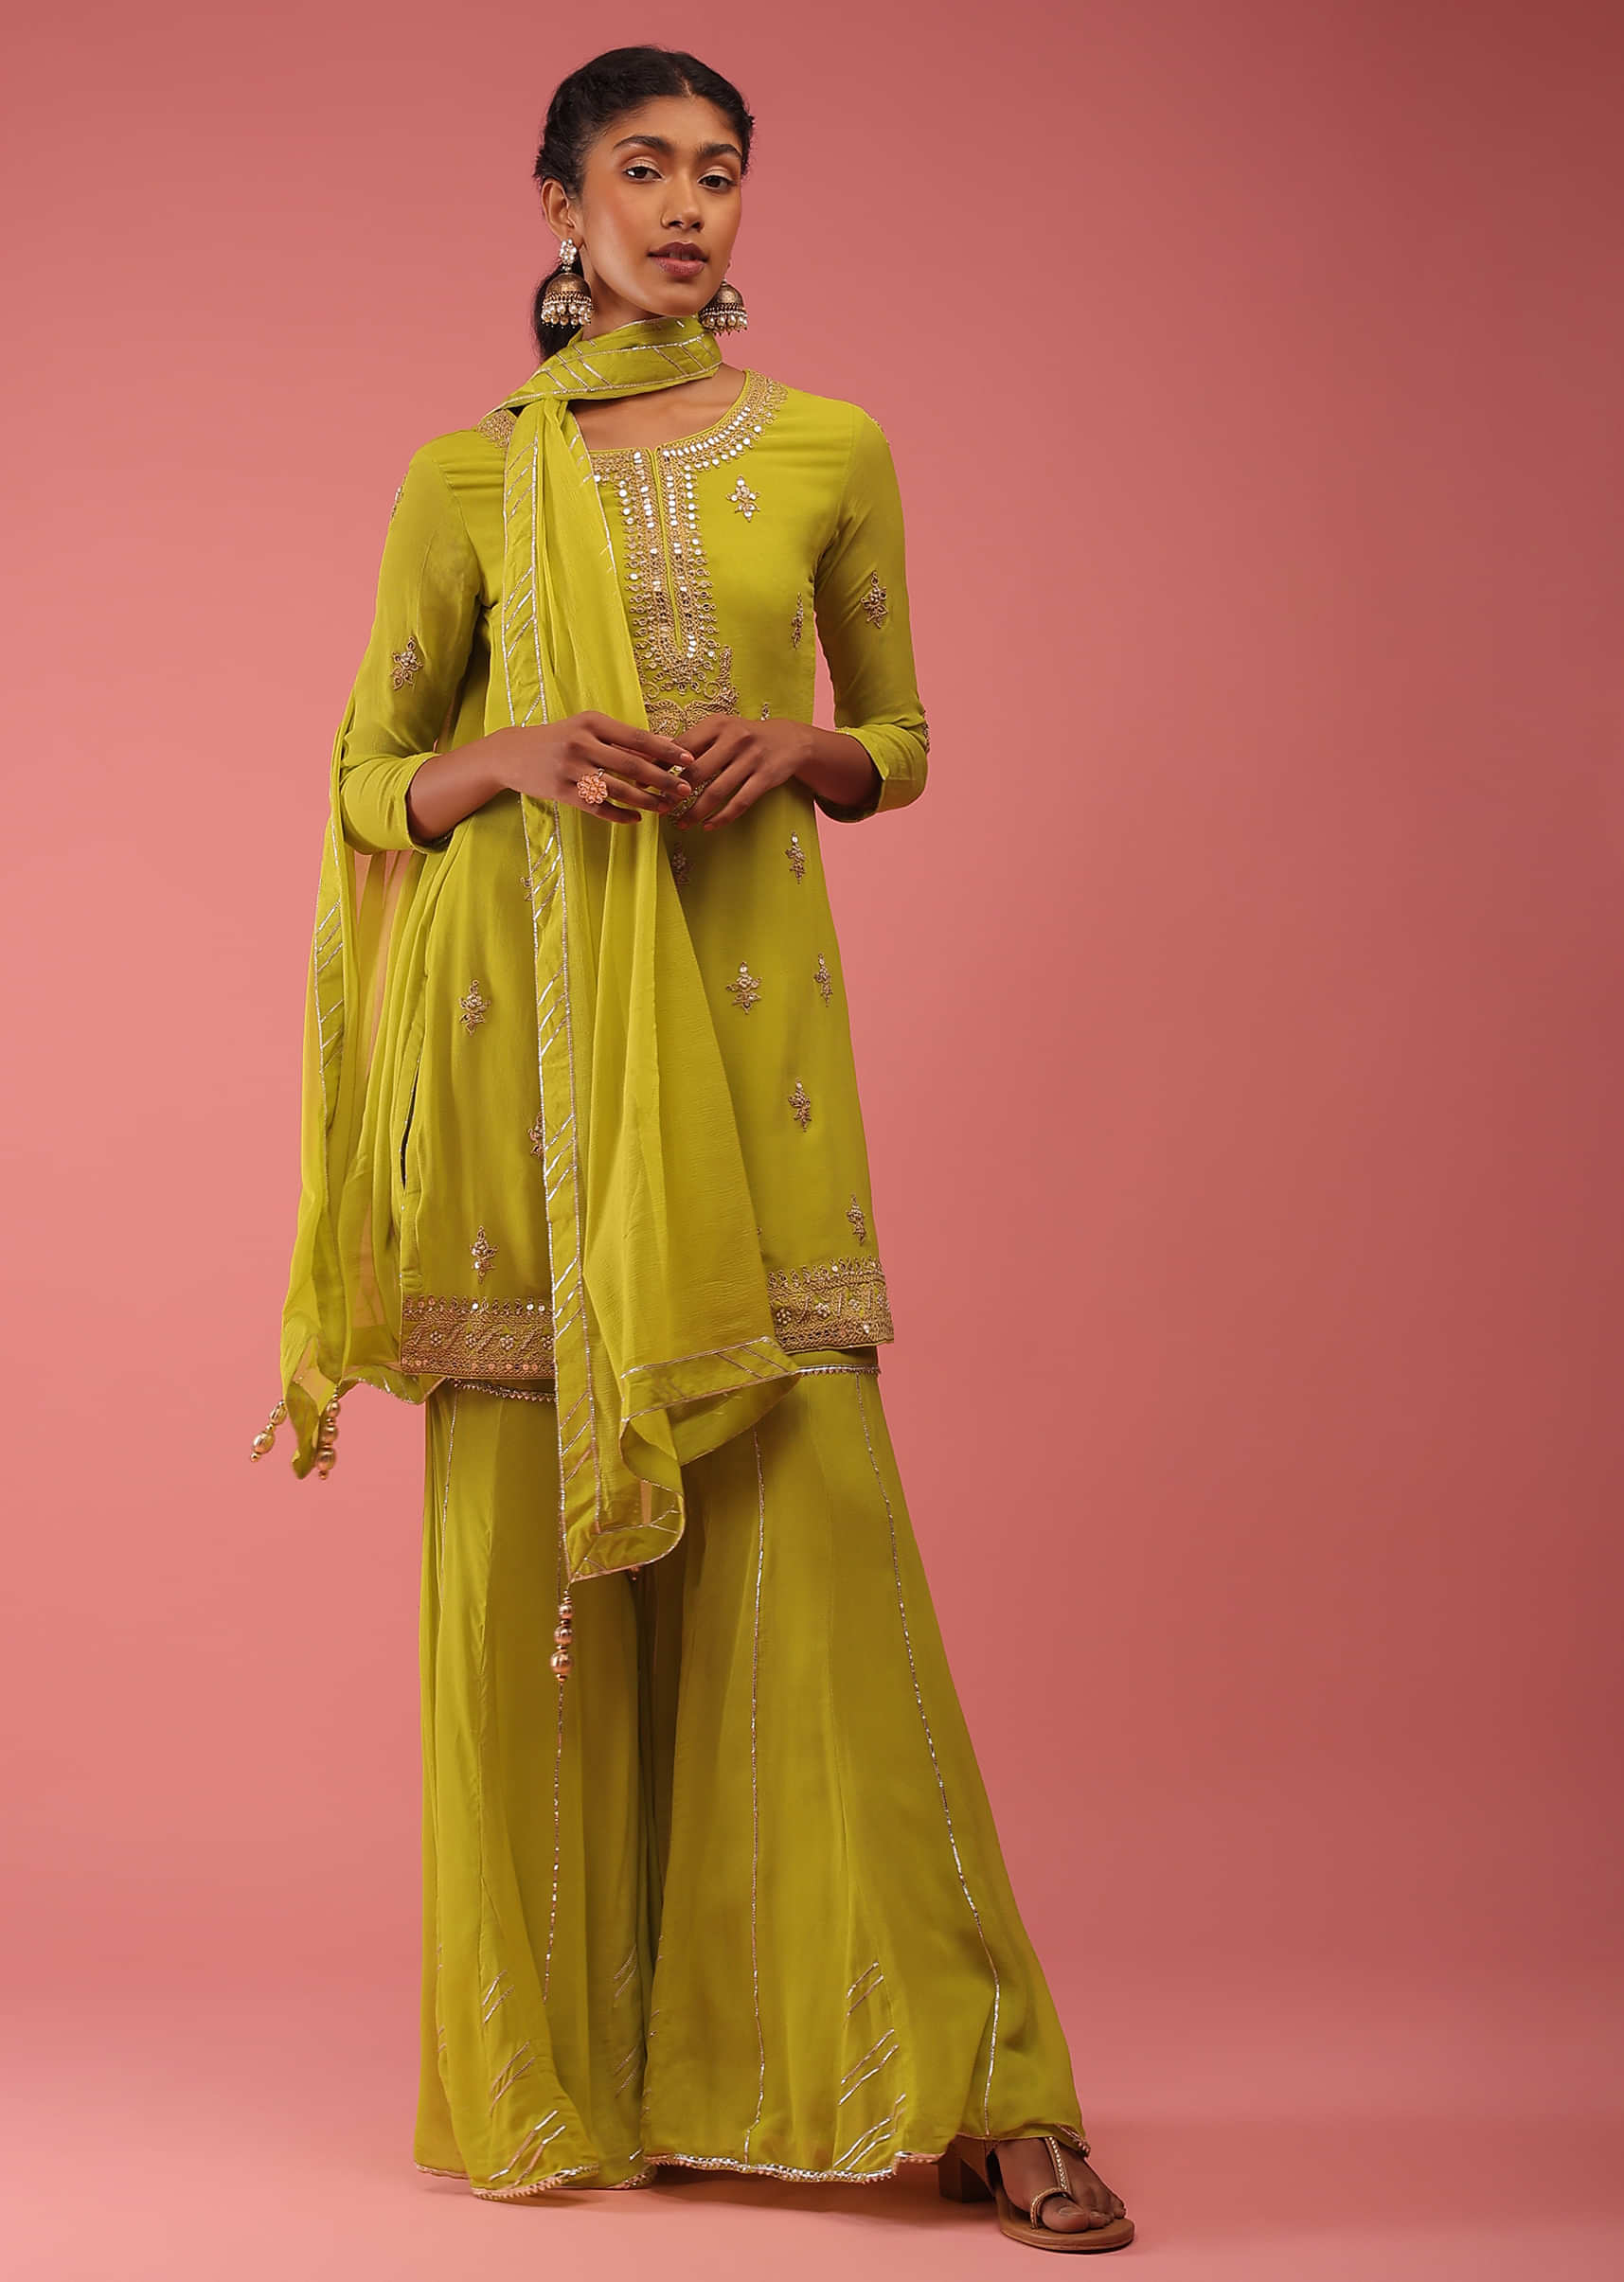 Warm Olive Sharara Suit In Zari And Zardozi Embroidery, Crafted In Georgette And Comes In 3/4Th Sleeves And A Round Neckline